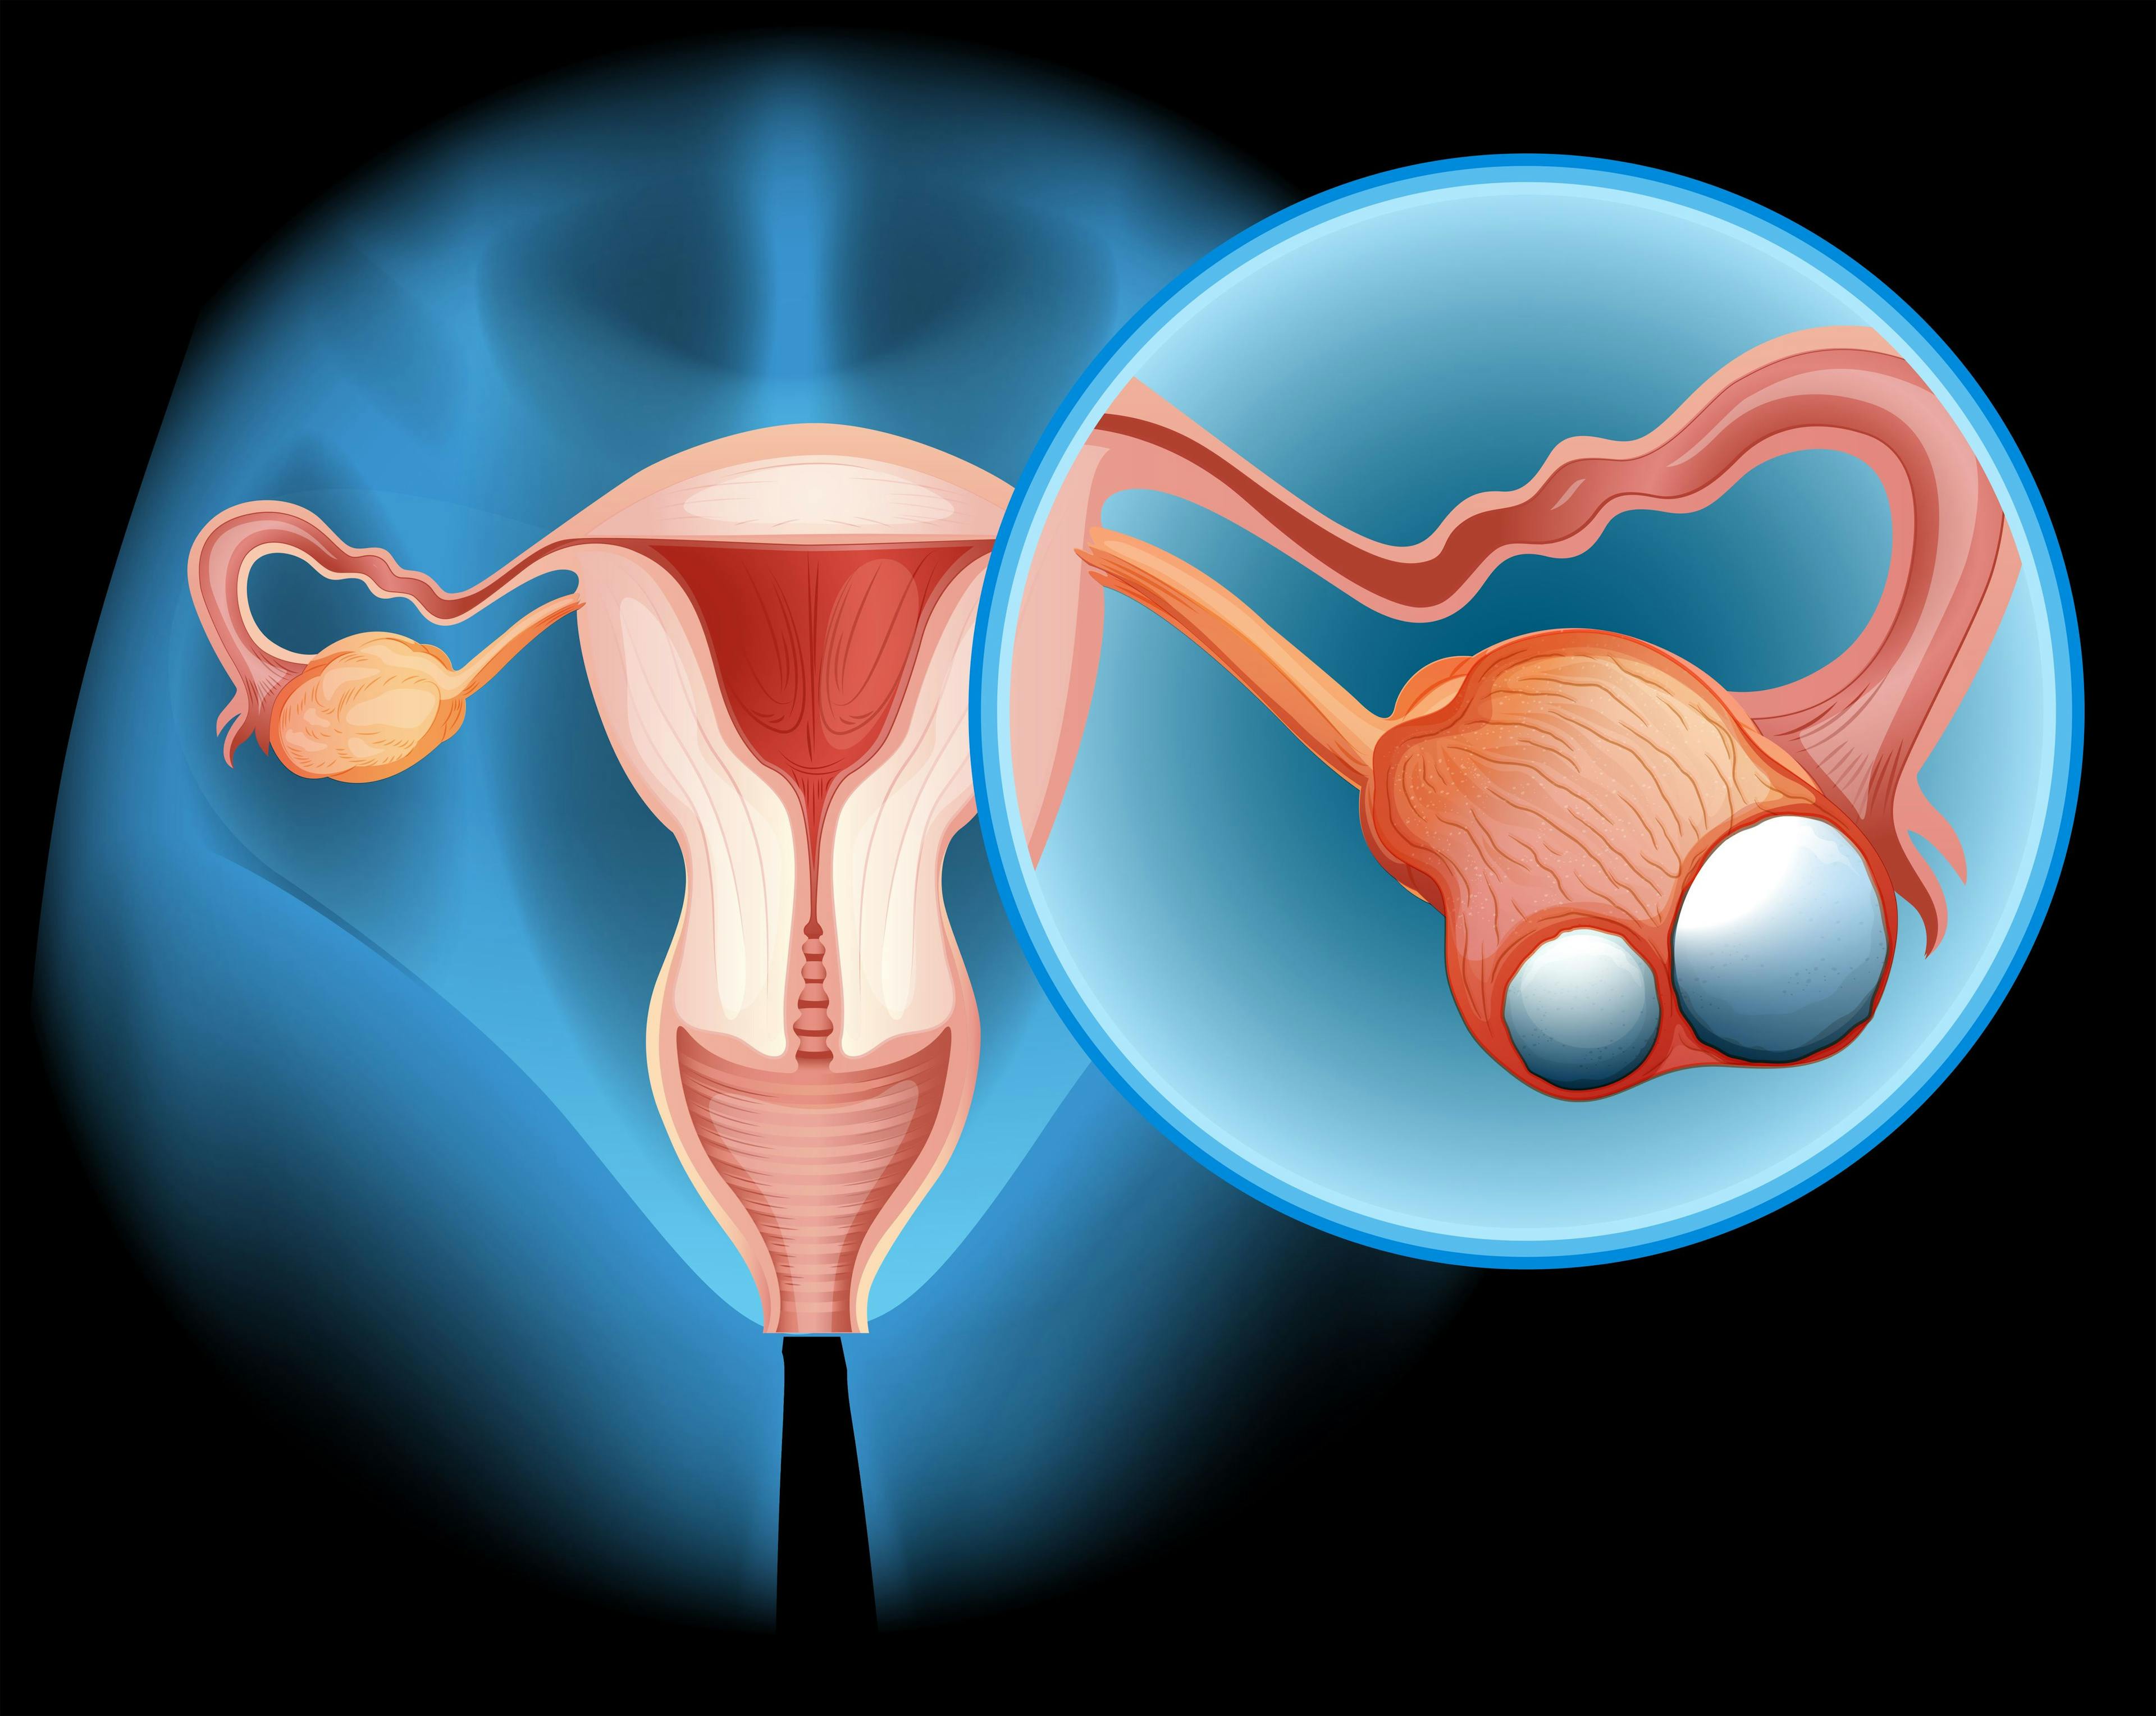 reproductive organs with ovaries highlighted with visible cancer